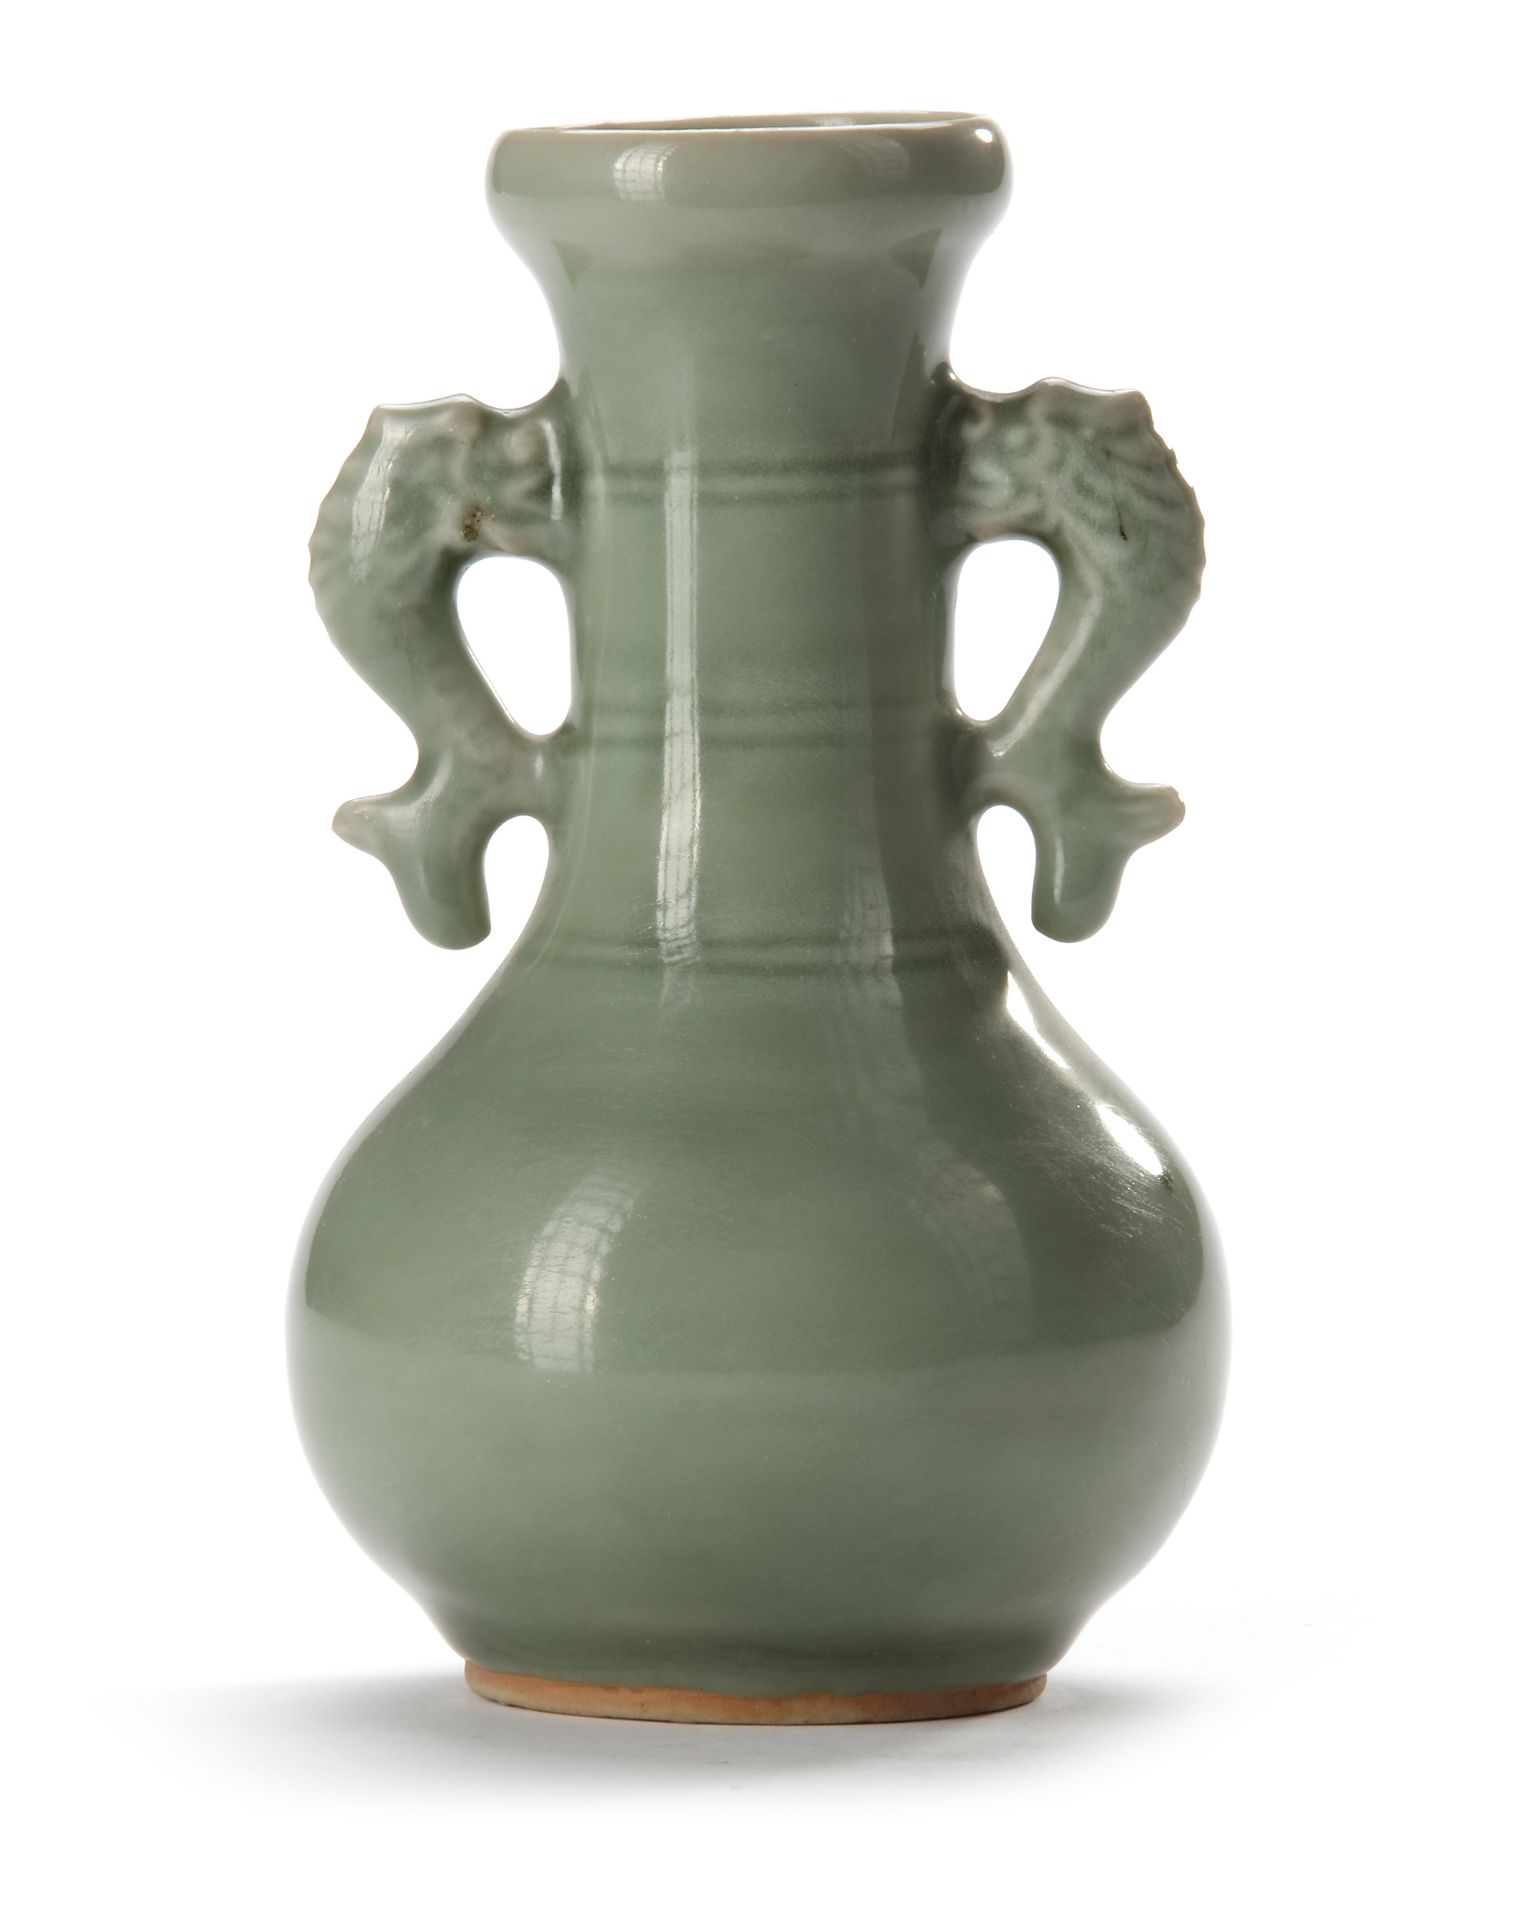 THREE CHINESE LONGQUAN CELADON VASES, SONG DYNASTY (960-1127 ) /YUAN DYNASTY (1271-1368) - Image 2 of 7